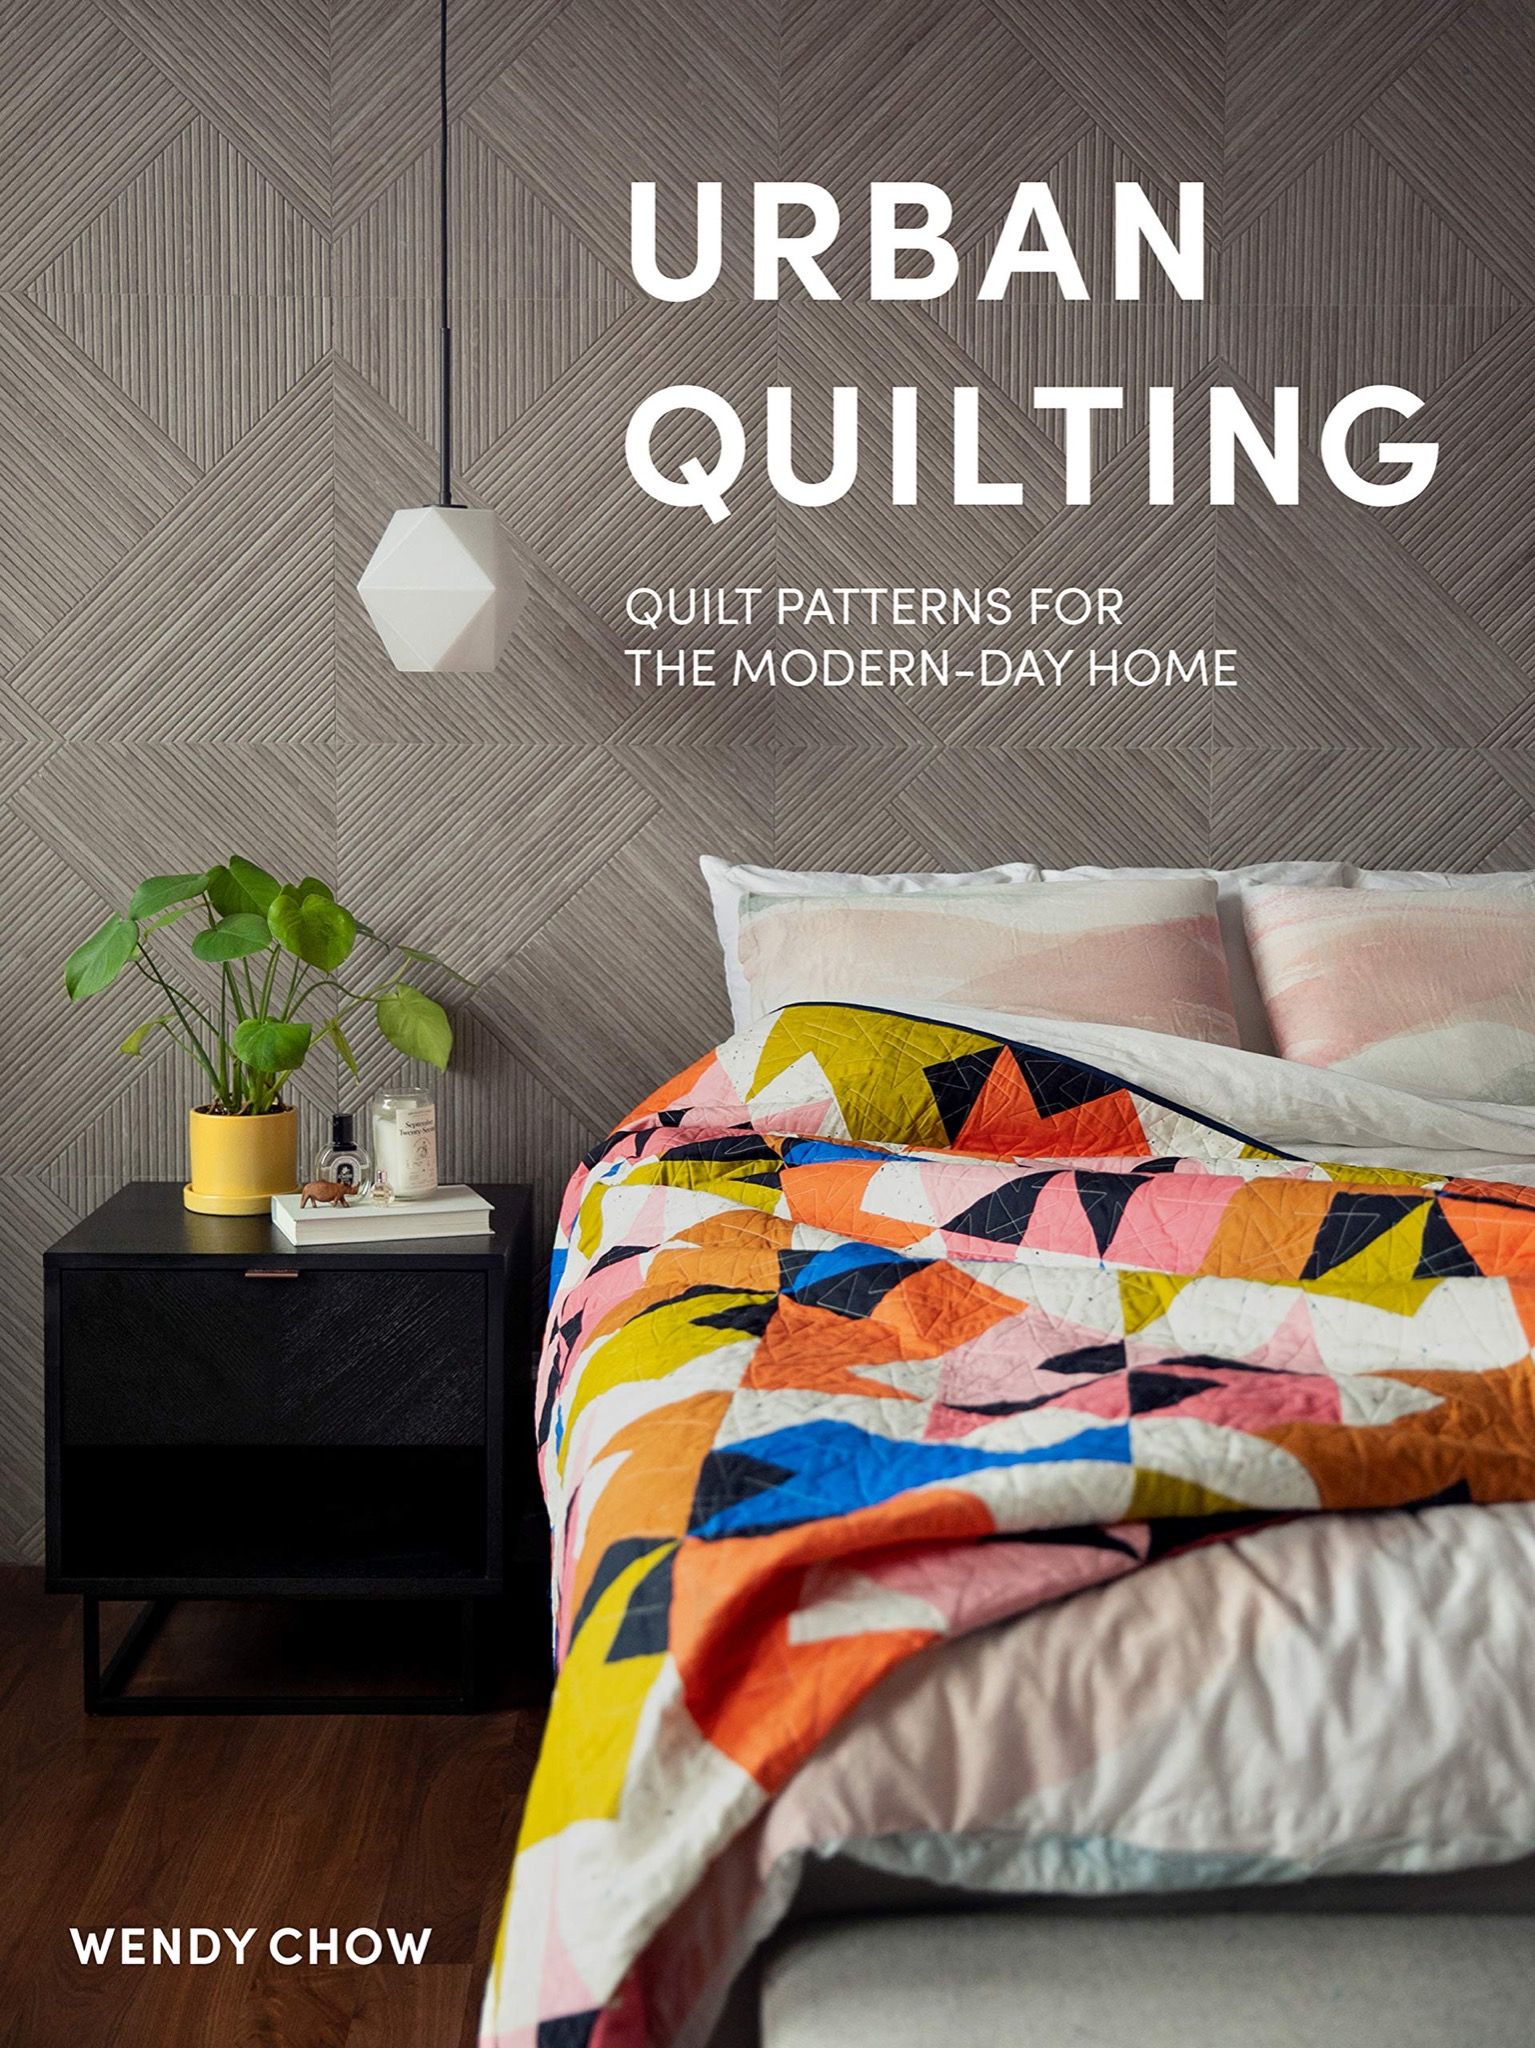  Urban Quilting : Quilt Patterns for the Modern-Day Home 